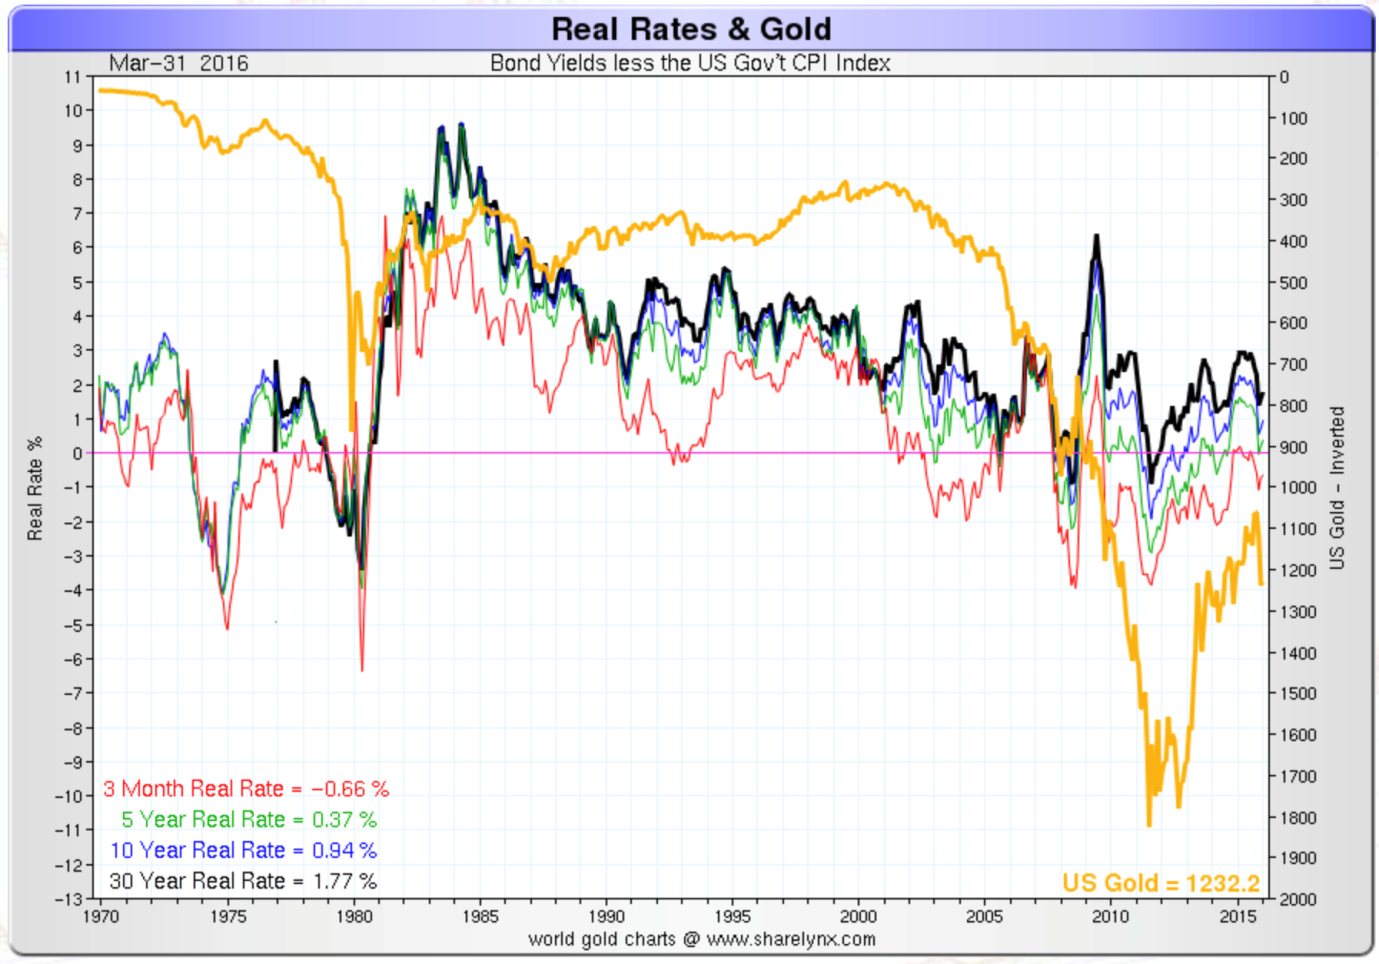 Real rates & gold